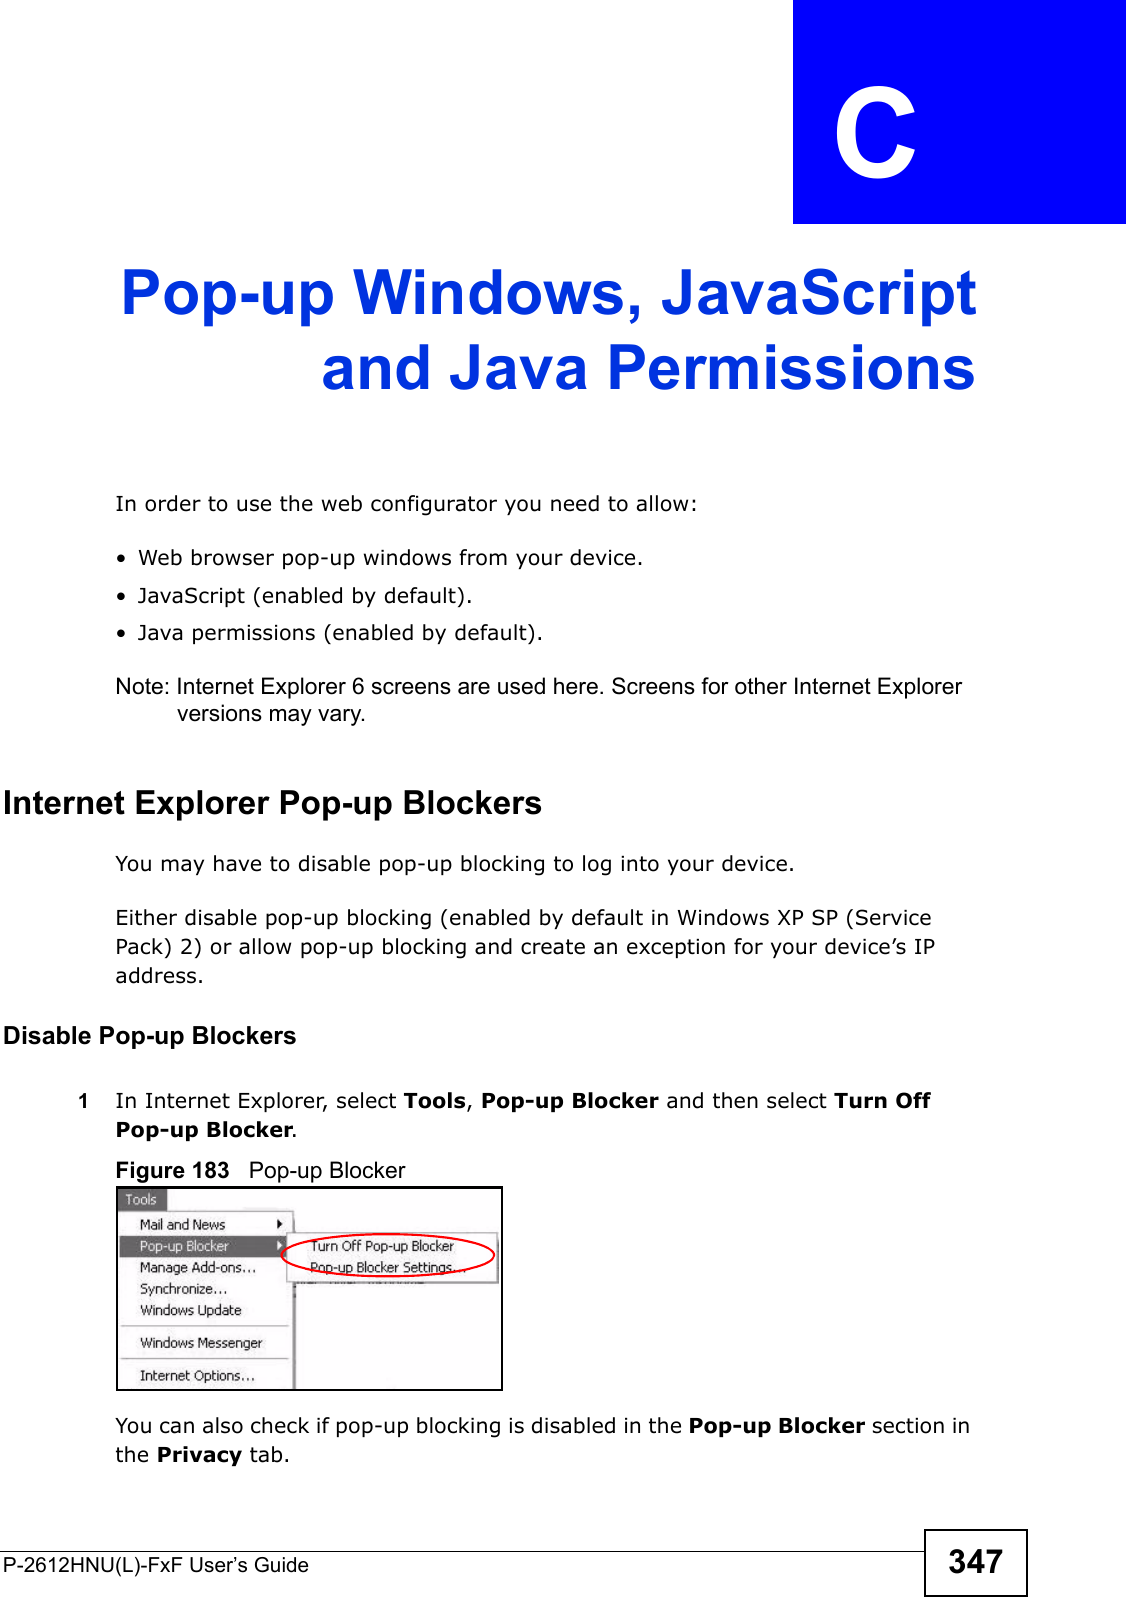 P-2612HNU(L)-FxF User’s Guide 347APPENDIX   C Pop-up Windows, JavaScriptand Java PermissionsIn order to use the web configurator you need to allow:• Web browser pop-up windows from your device.• JavaScript (enabled by default).• Java permissions (enabled by default).Note: Internet Explorer 6 screens are used here. Screens for other Internet Explorer versions may vary.Internet Explorer Pop-up BlockersYou may have to disable pop-up blocking to log into your device. Either disable pop-up blocking (enabled by default in Windows XP SP (Service Pack) 2) or allow pop-up blocking and create an exception for your device’s IP address.Disable Pop-up Blockers1In Internet Explorer, select Tools, Pop-up Blocker and then select Turn Off Pop-up Blocker. Figure 183   Pop-up BlockerYou can also check if pop-up blocking is disabled in the Pop-up Blocker section inthe Privacy tab.